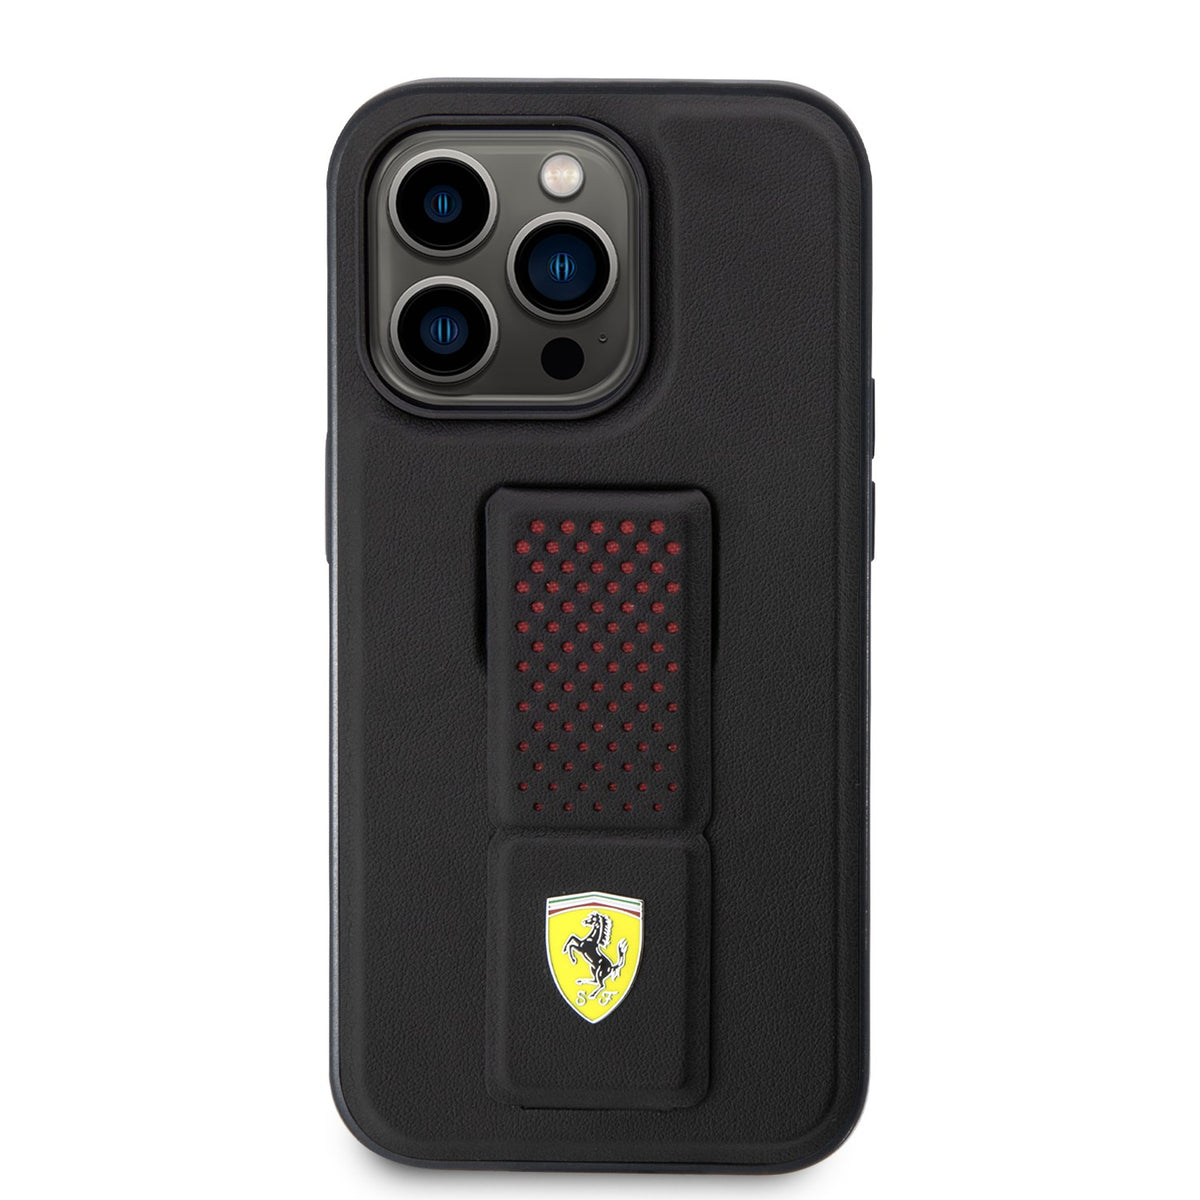 Ferrari Gripstand Case with More Variants